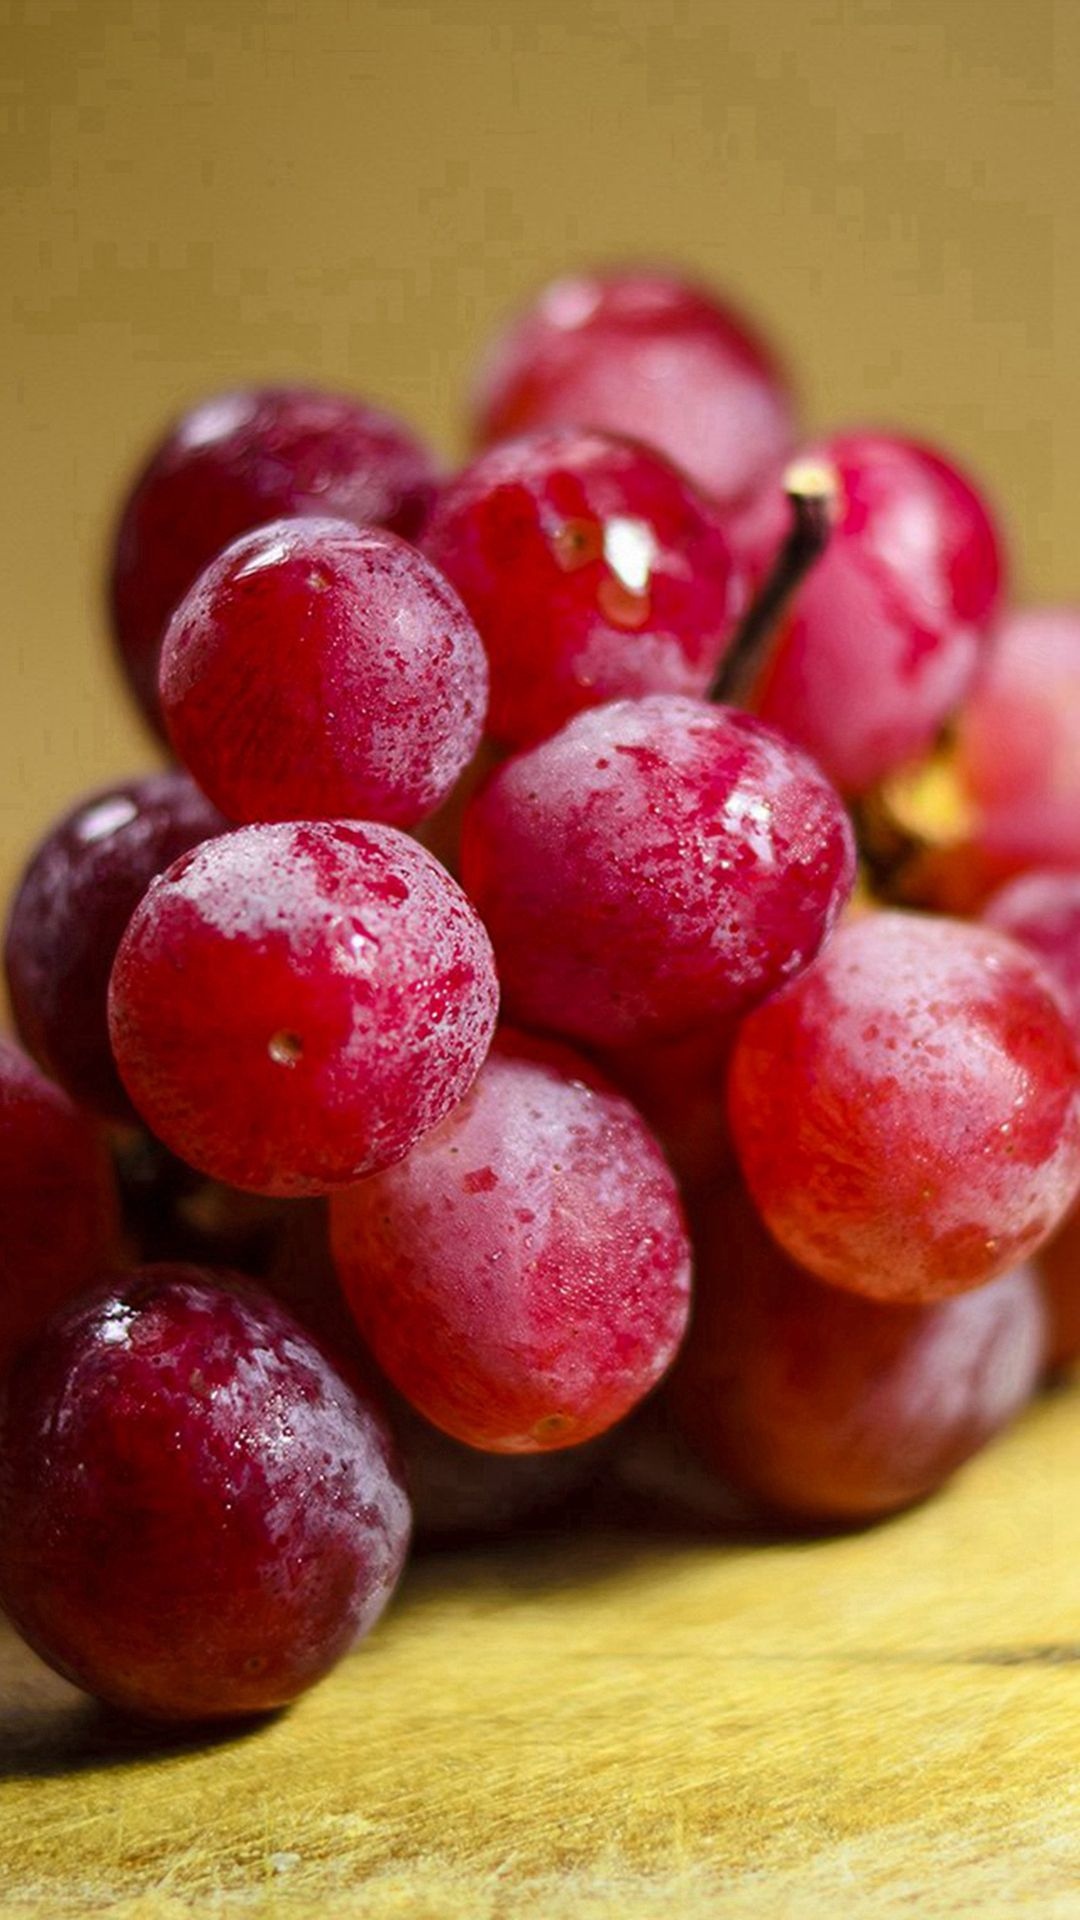 Grapes: Excellent as a table dessert, combined with other fruits in fruit salads. 1080x1920 Full HD Background.